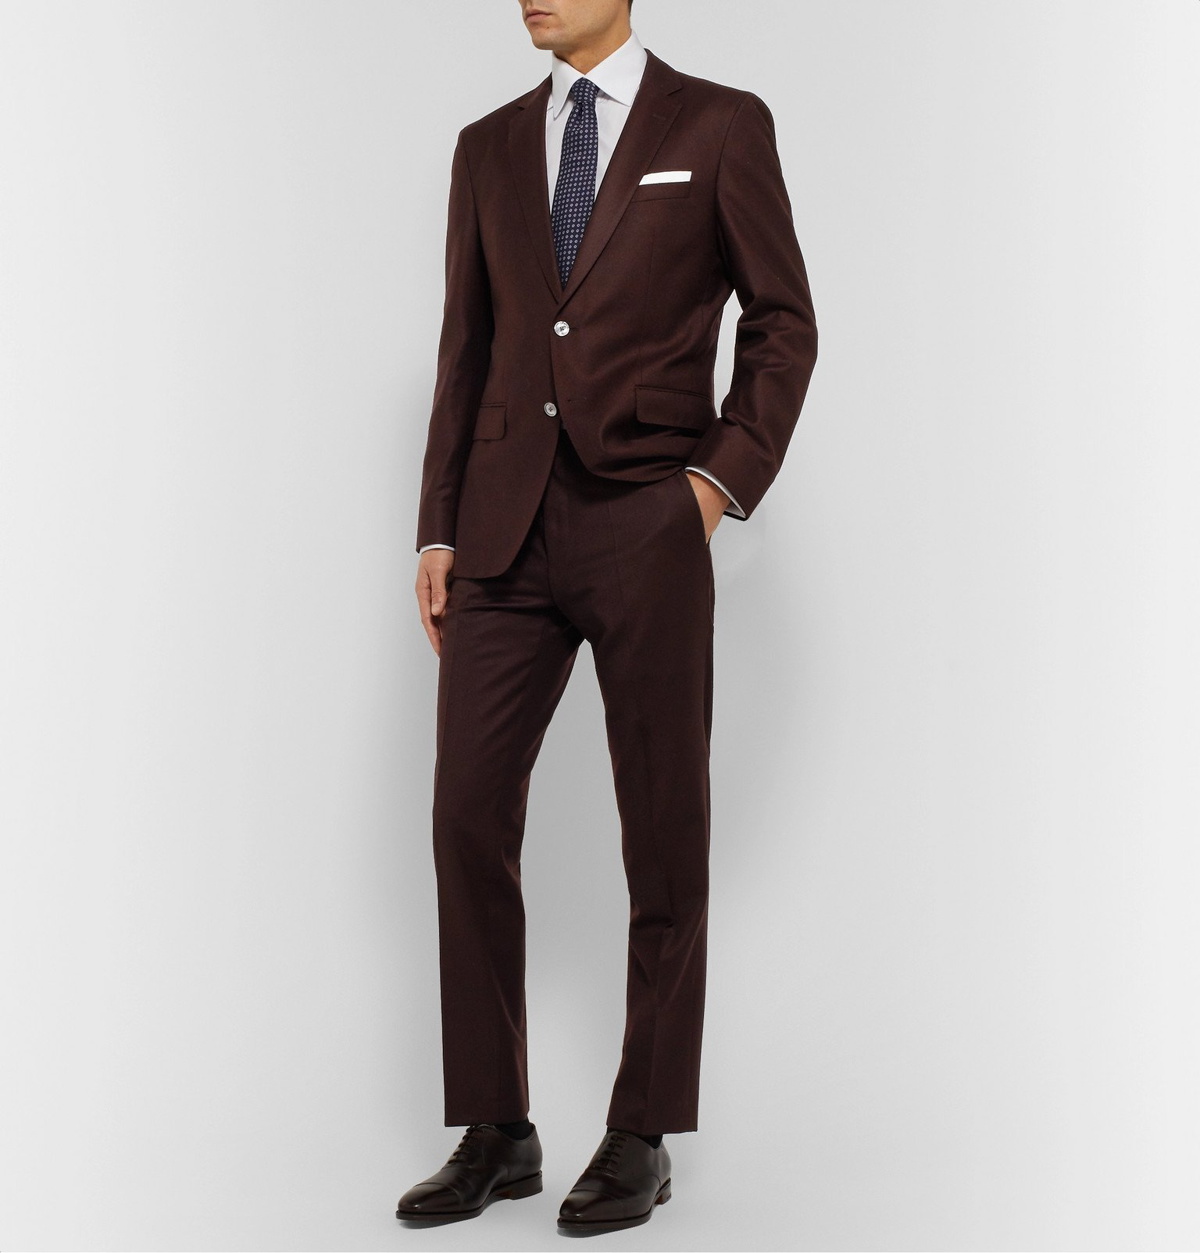 Buy Burgundy Trousers  Pants for Men by The Indian Garage Co Online   Ajiocom